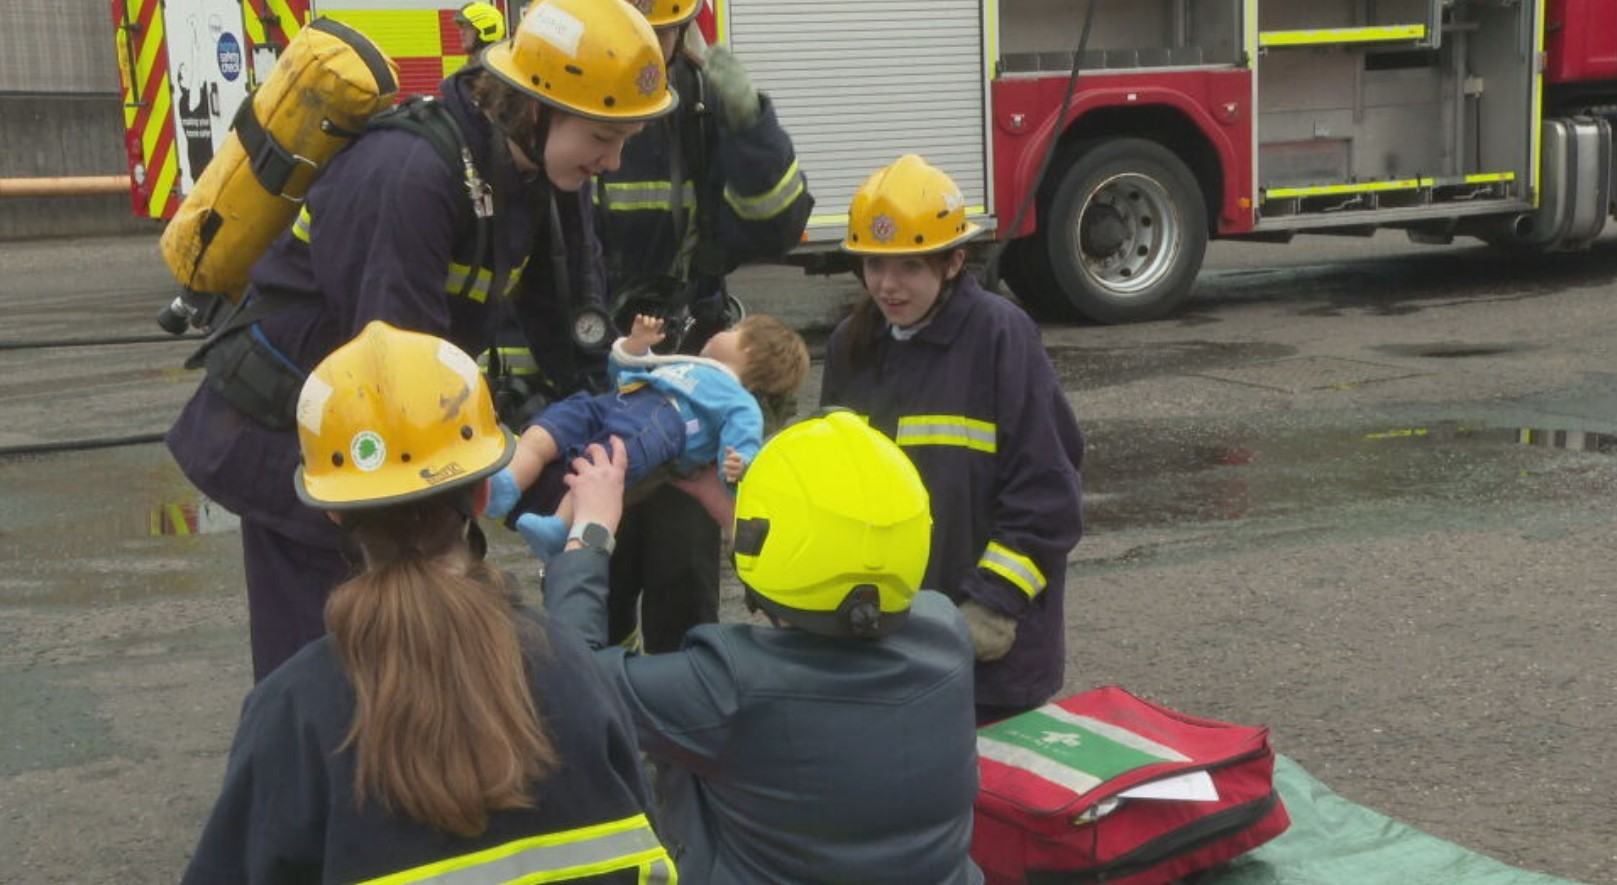 Pupils learned skills such as casualty rescue, operating a hose and erecting a ladder